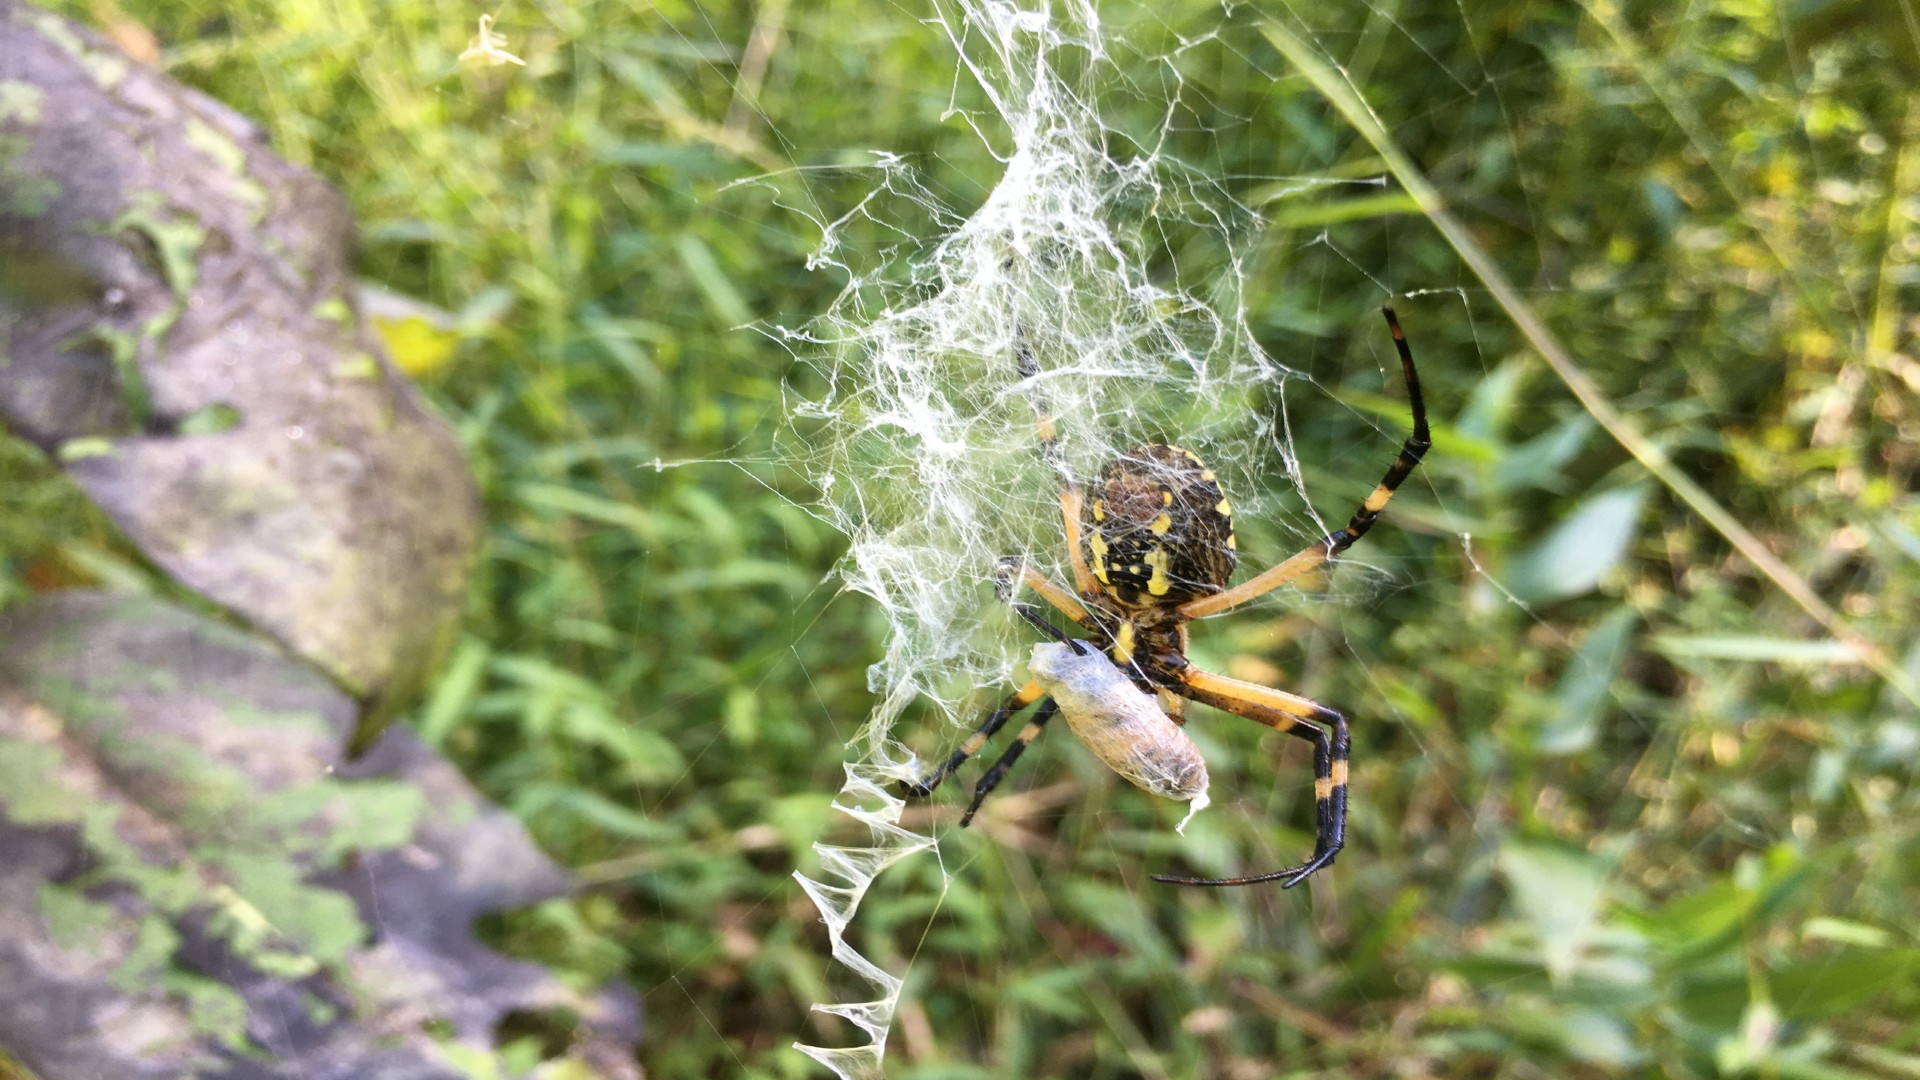 A yellow garden spider spins its web in a grassy meadow.